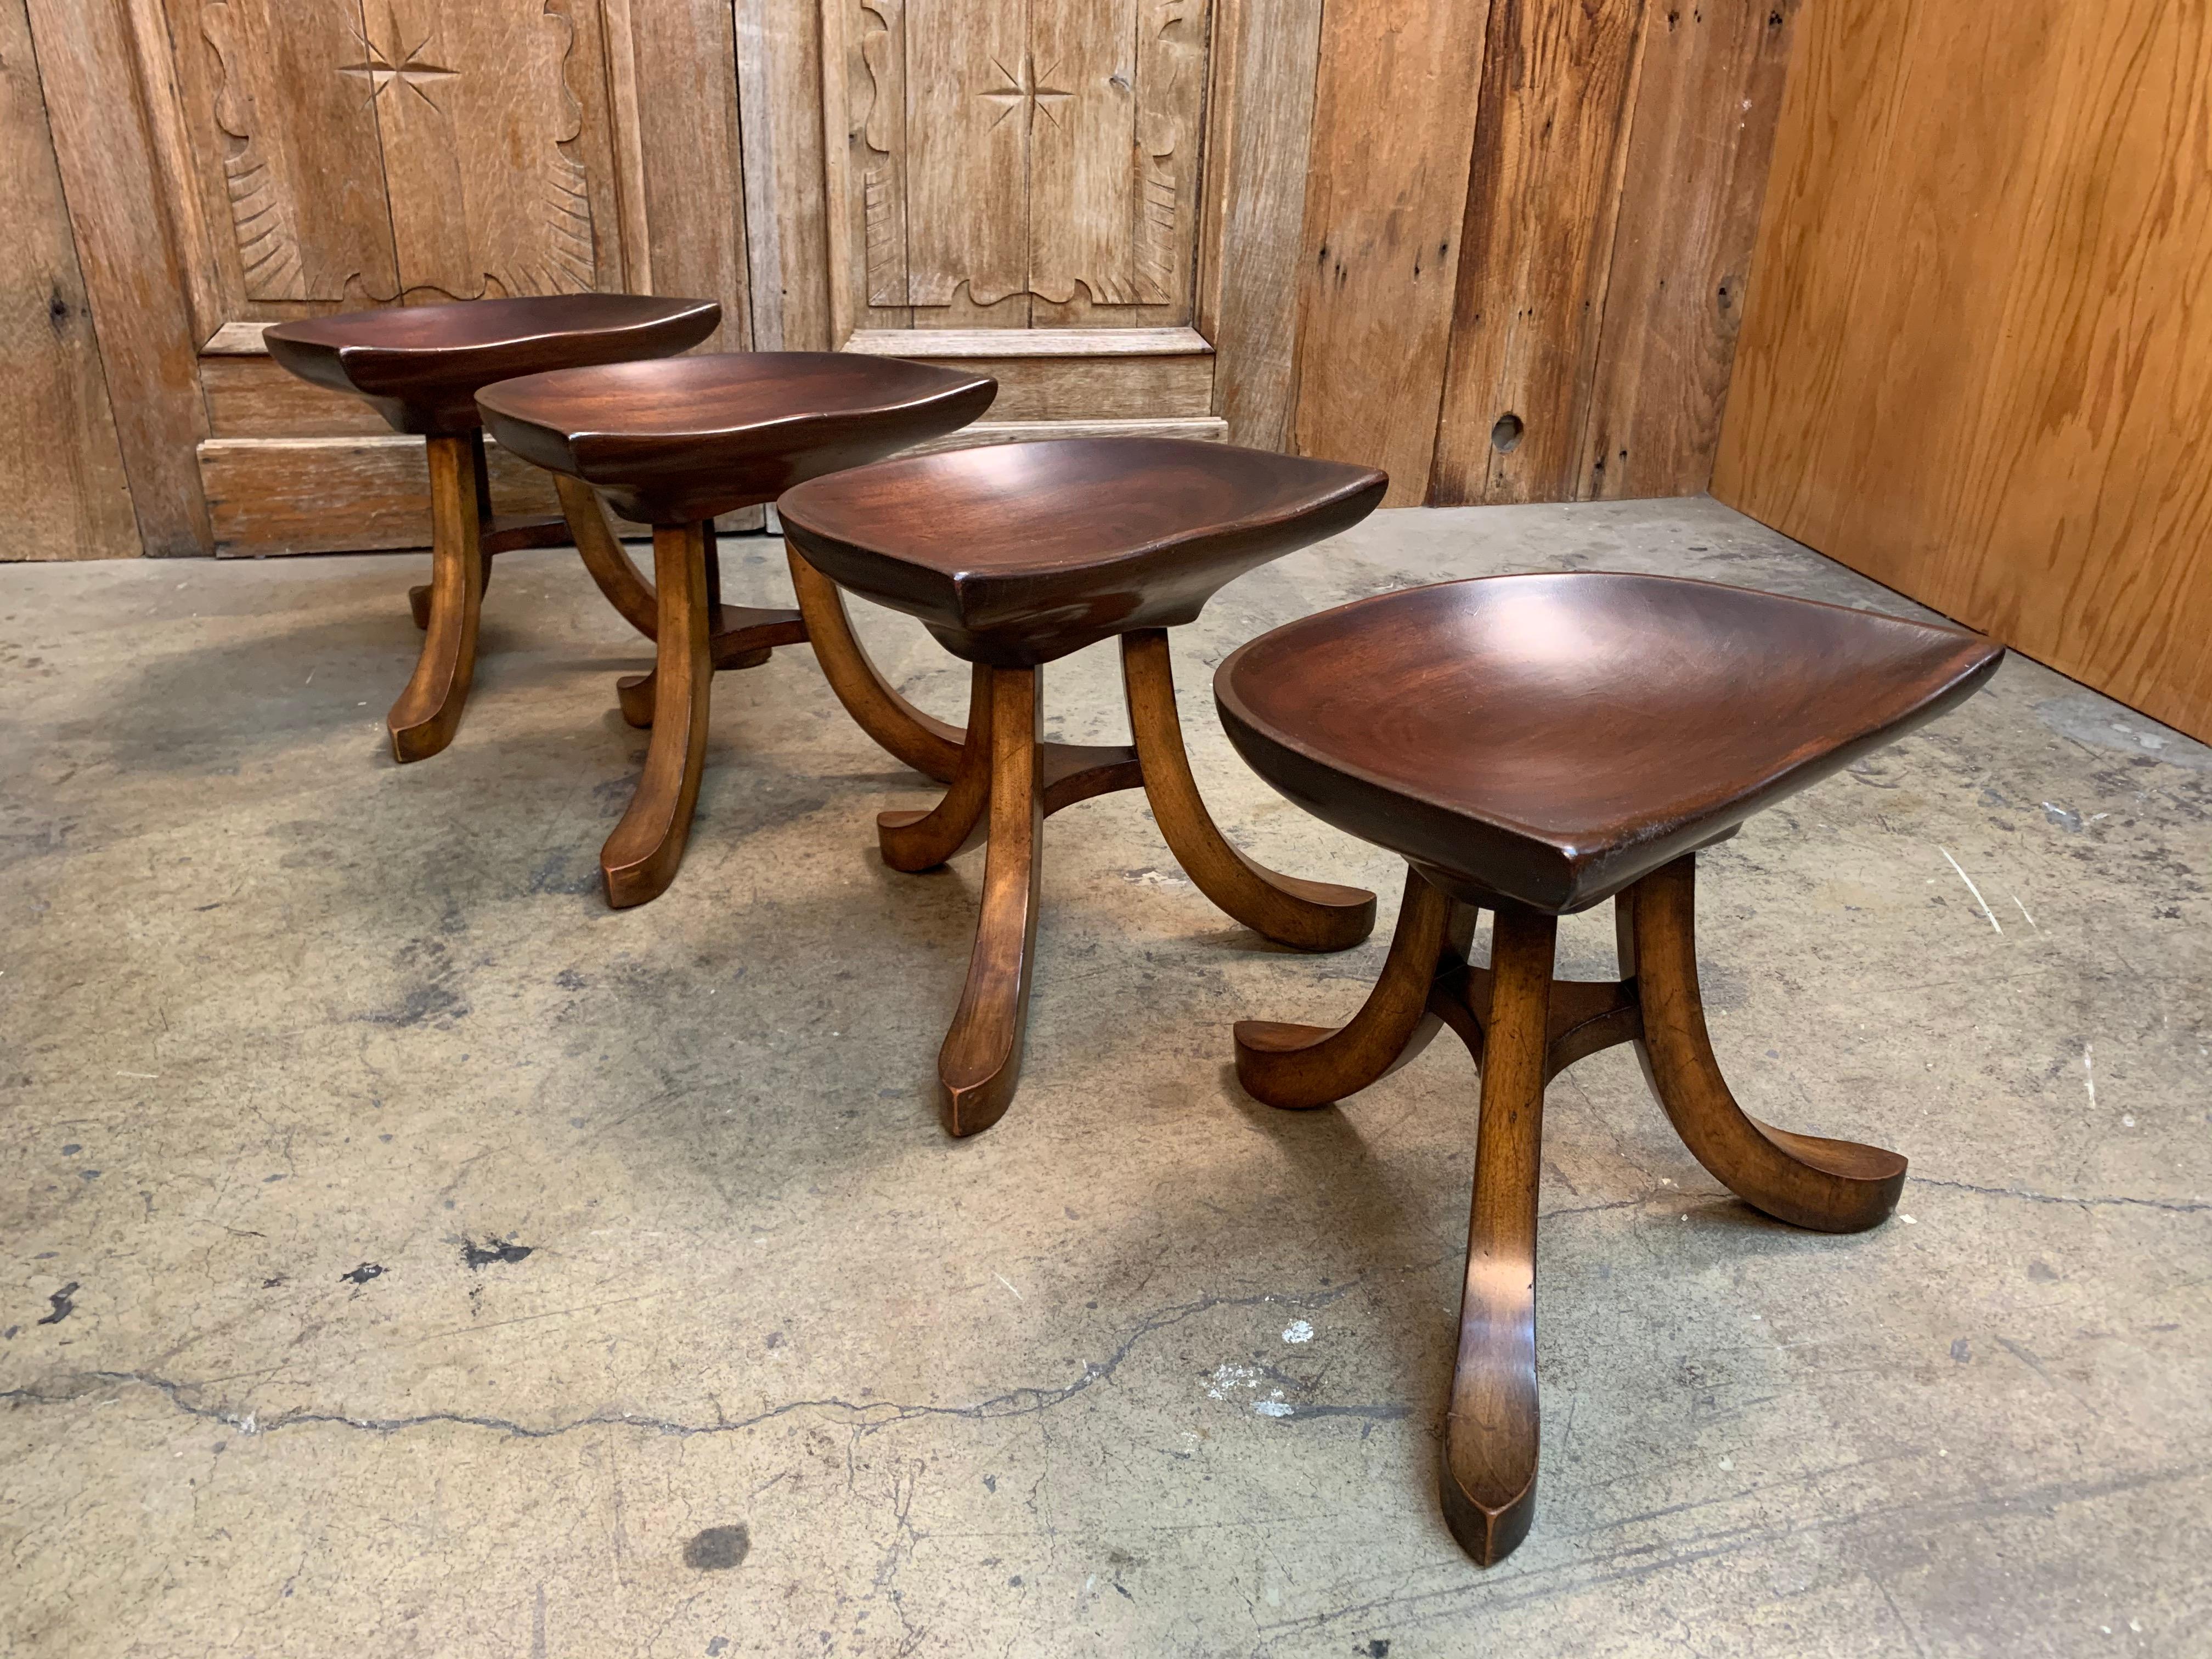 Three legged tractor style seated stools in the style of Adolf Loos.
The seats are sculpted of one piece of mahogany.